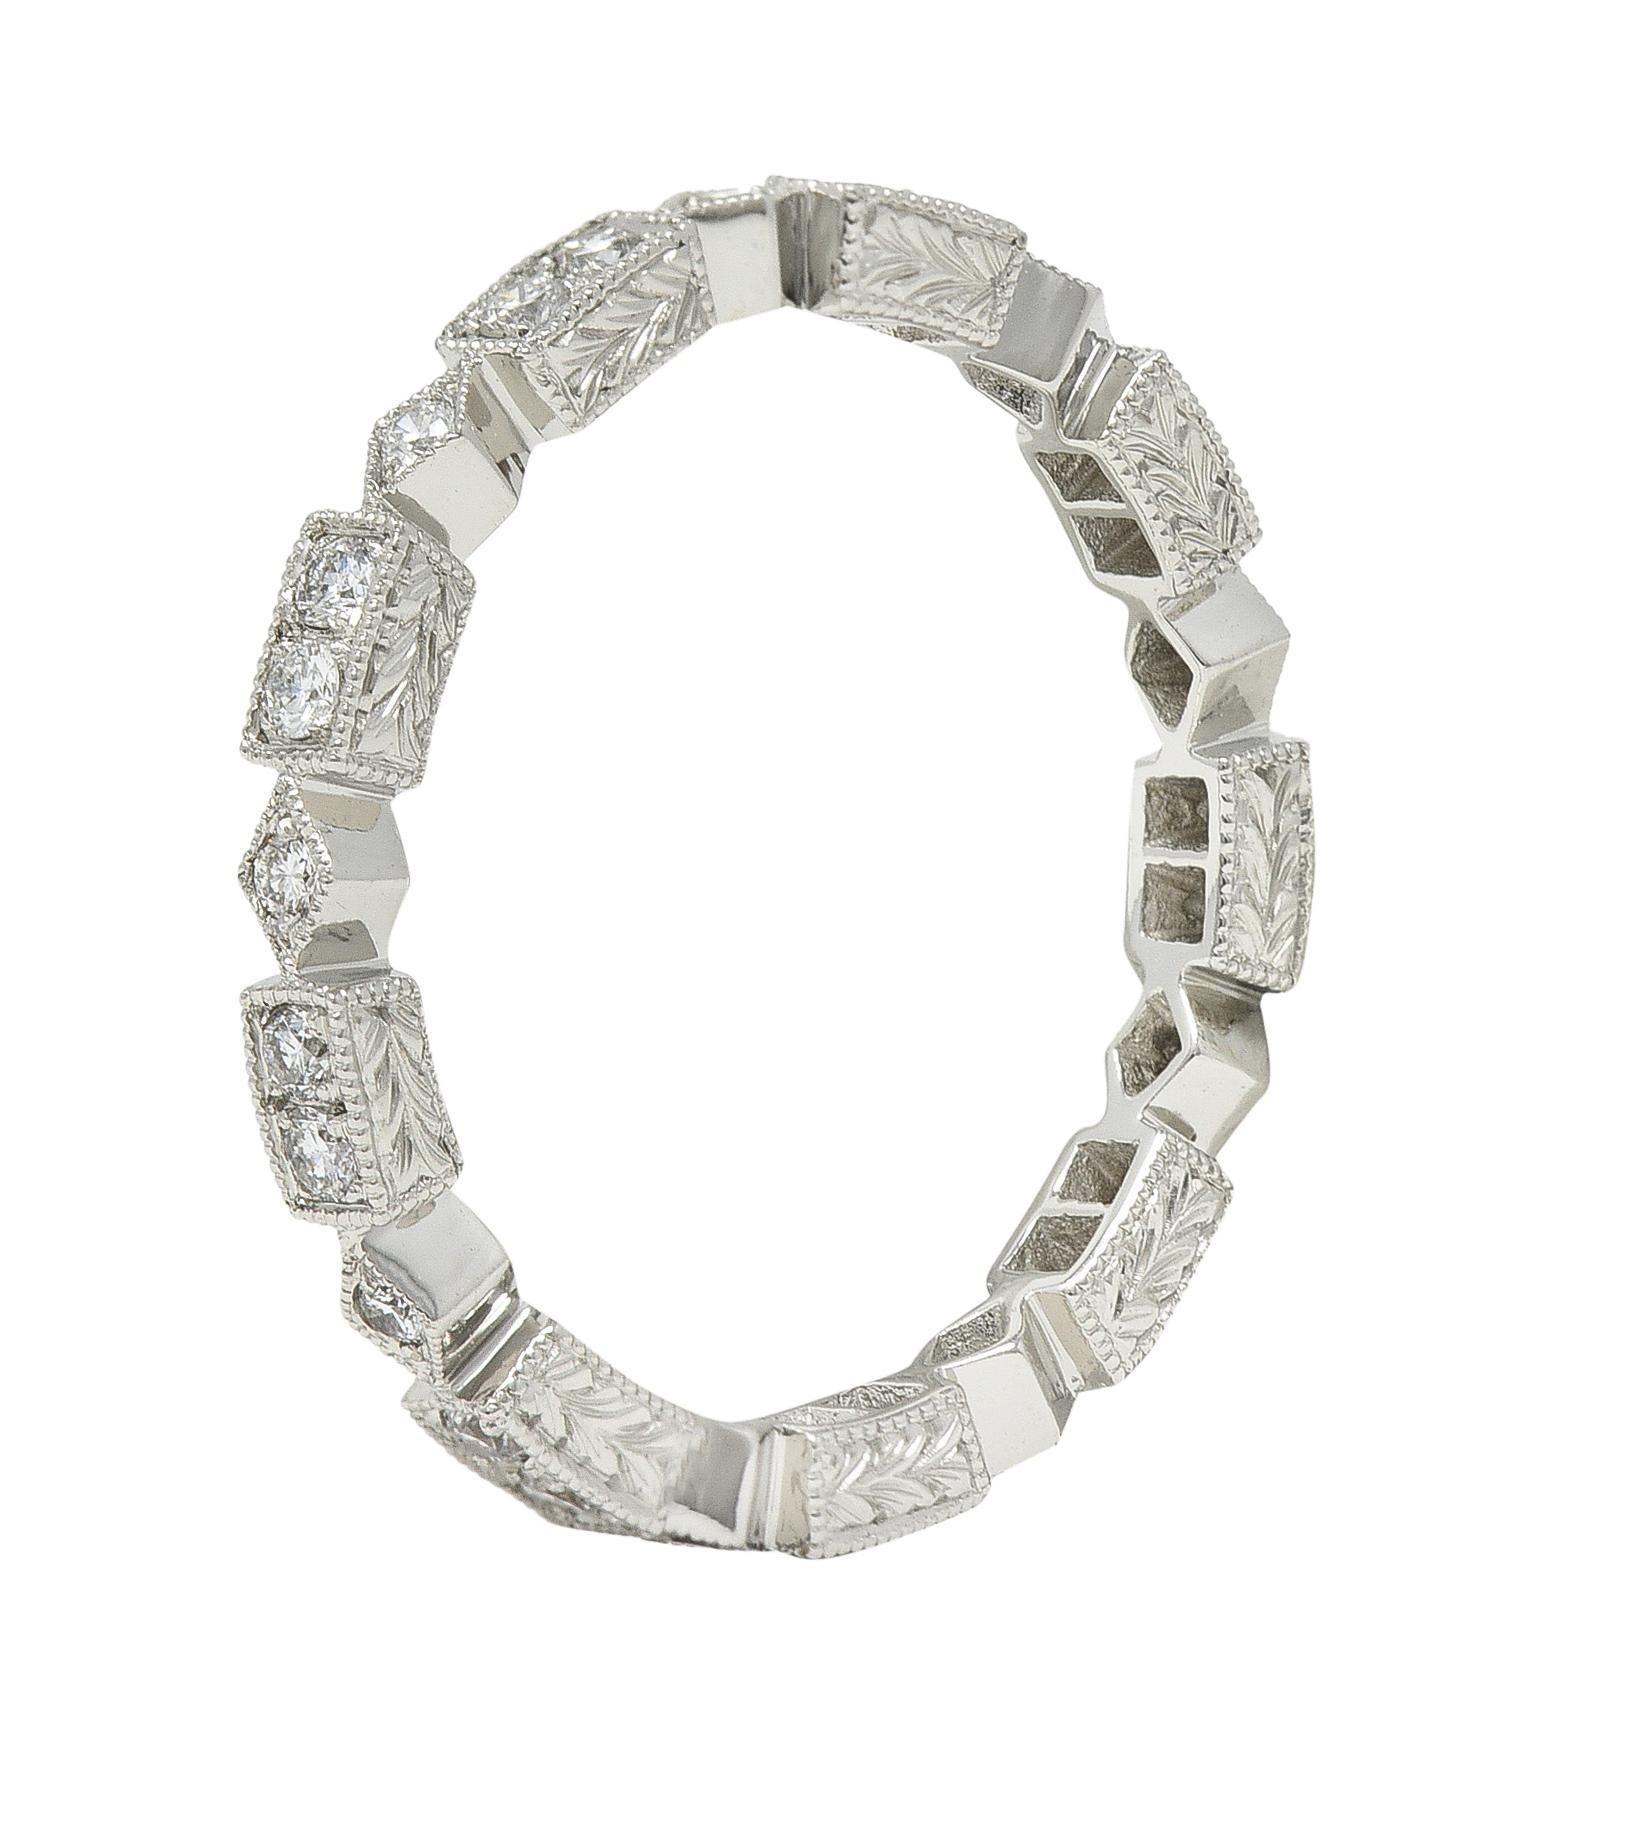 Eternity band ring is comprised of geometric forms with milgrain edging
Navette stations alternating with rectangles - profiles are engraved
Accented by round brilliant cut diamonds
Weighing in total approximately 0.31 carat - eye clean and